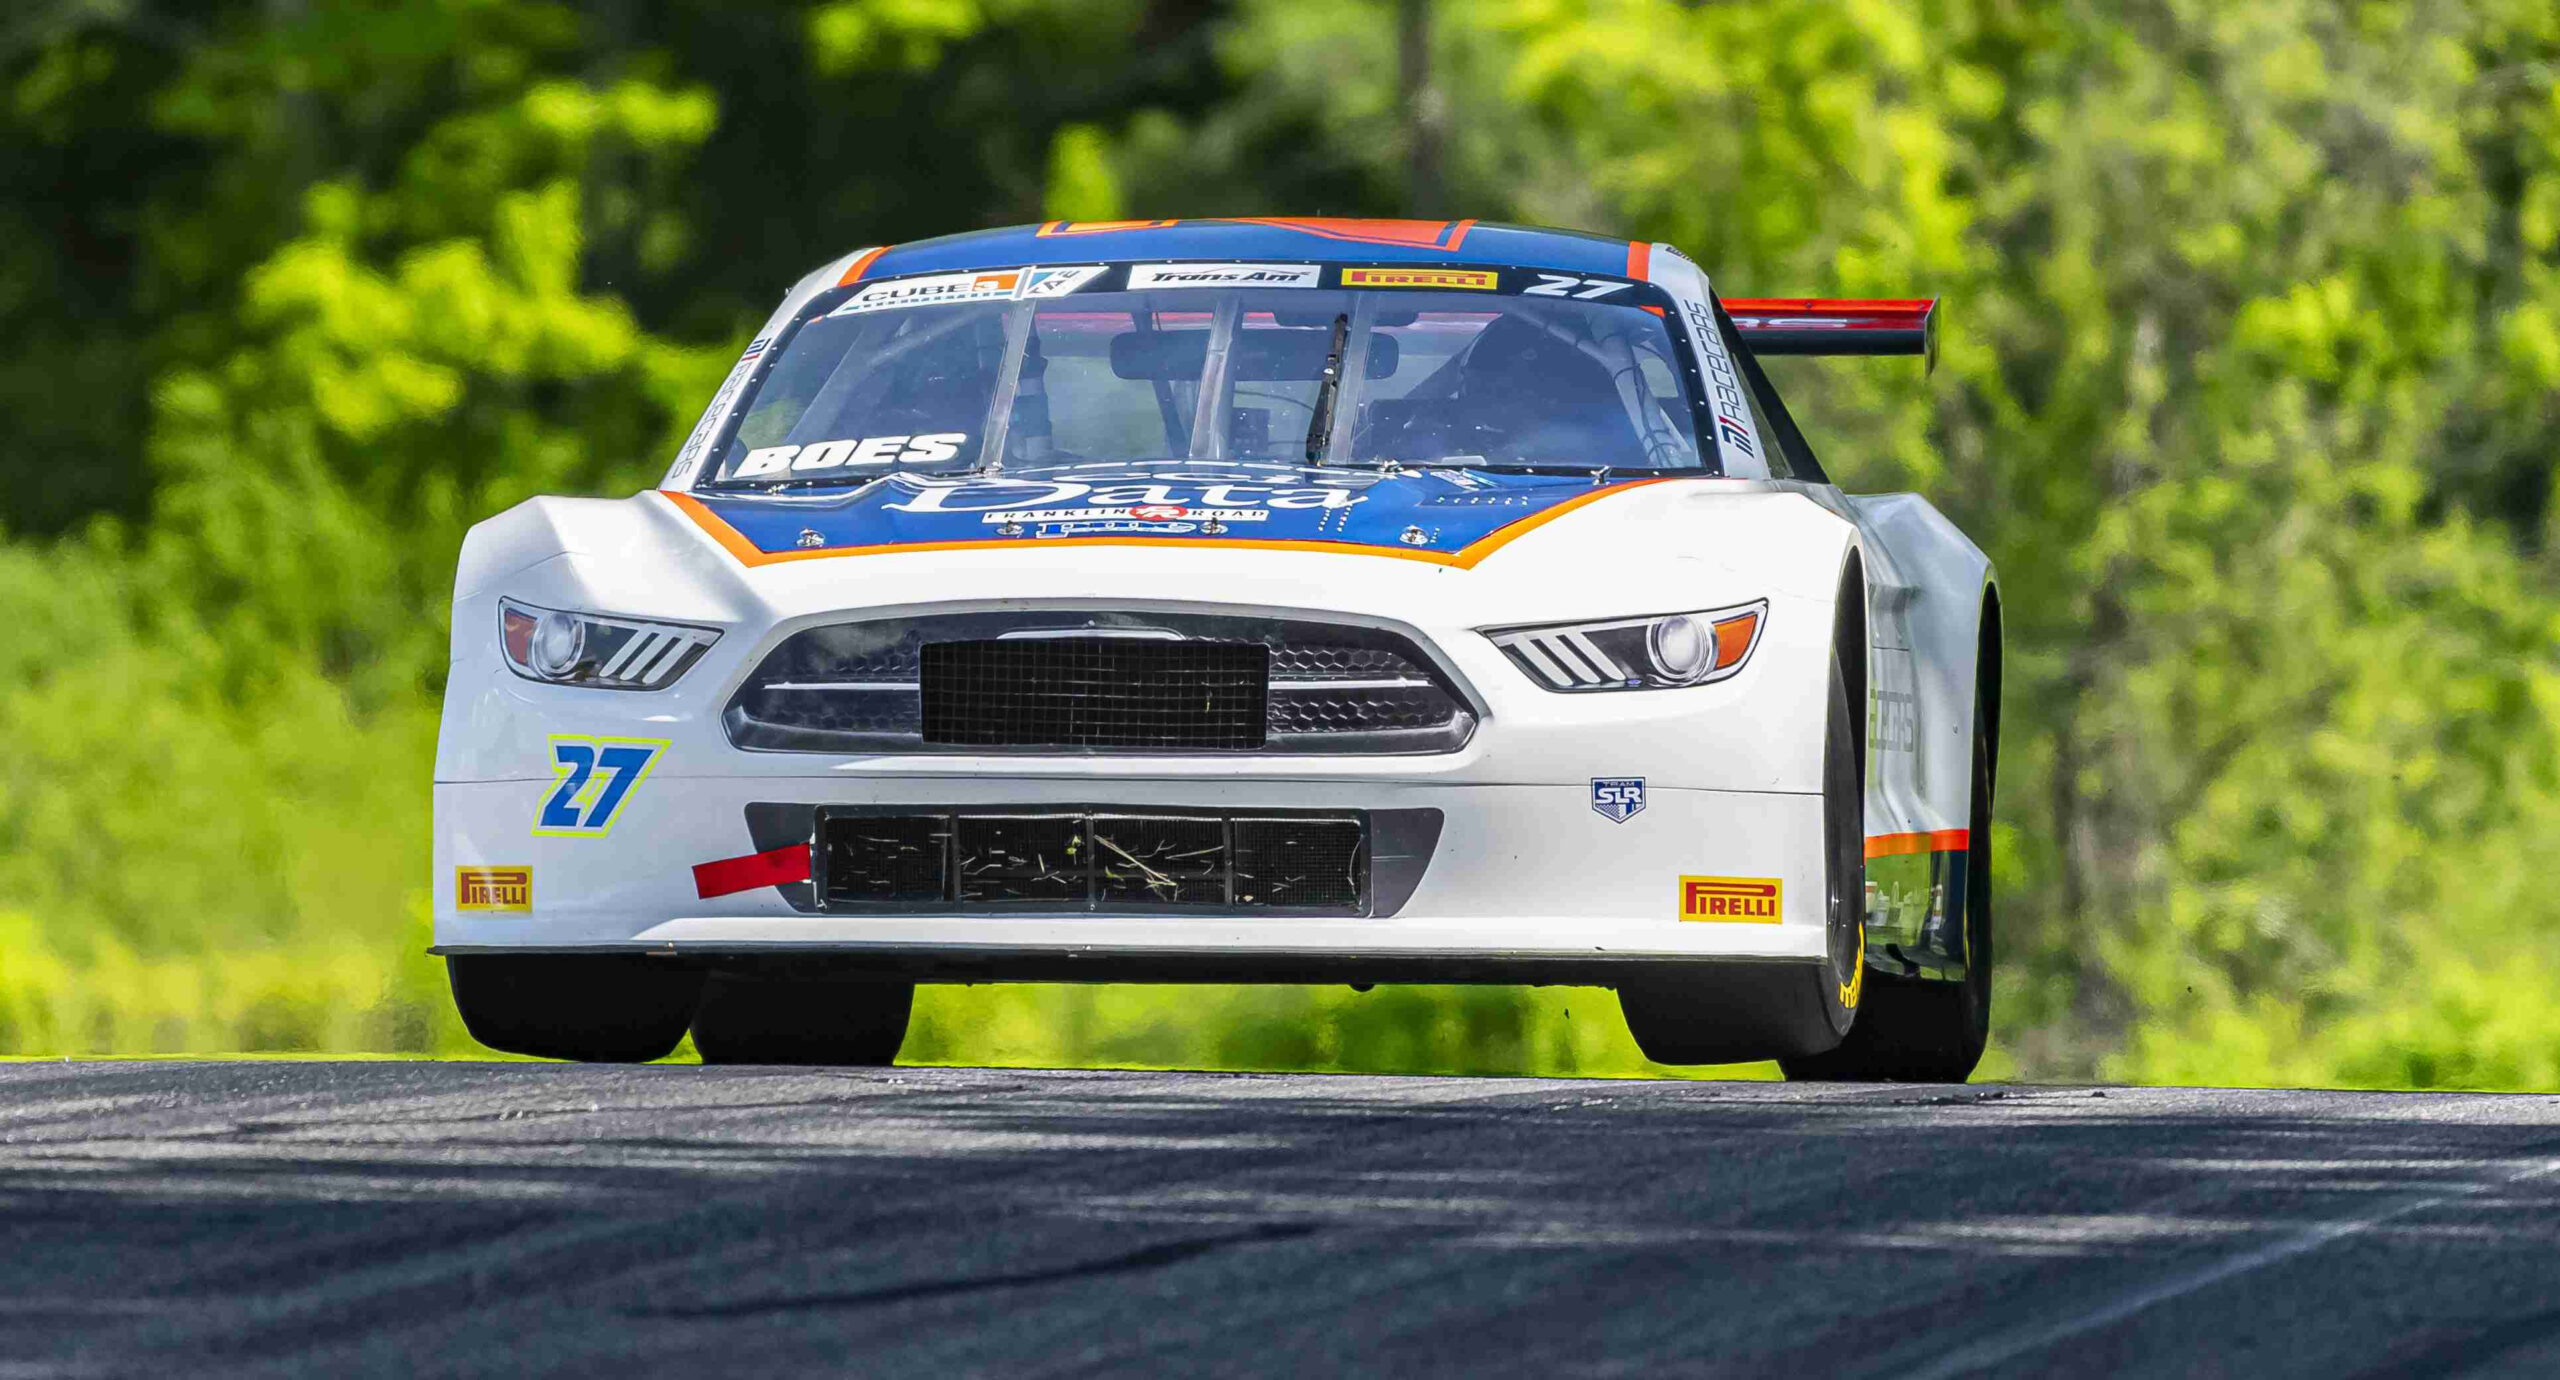 Star-Studded Lineup for TeamSLR at Lime Rock